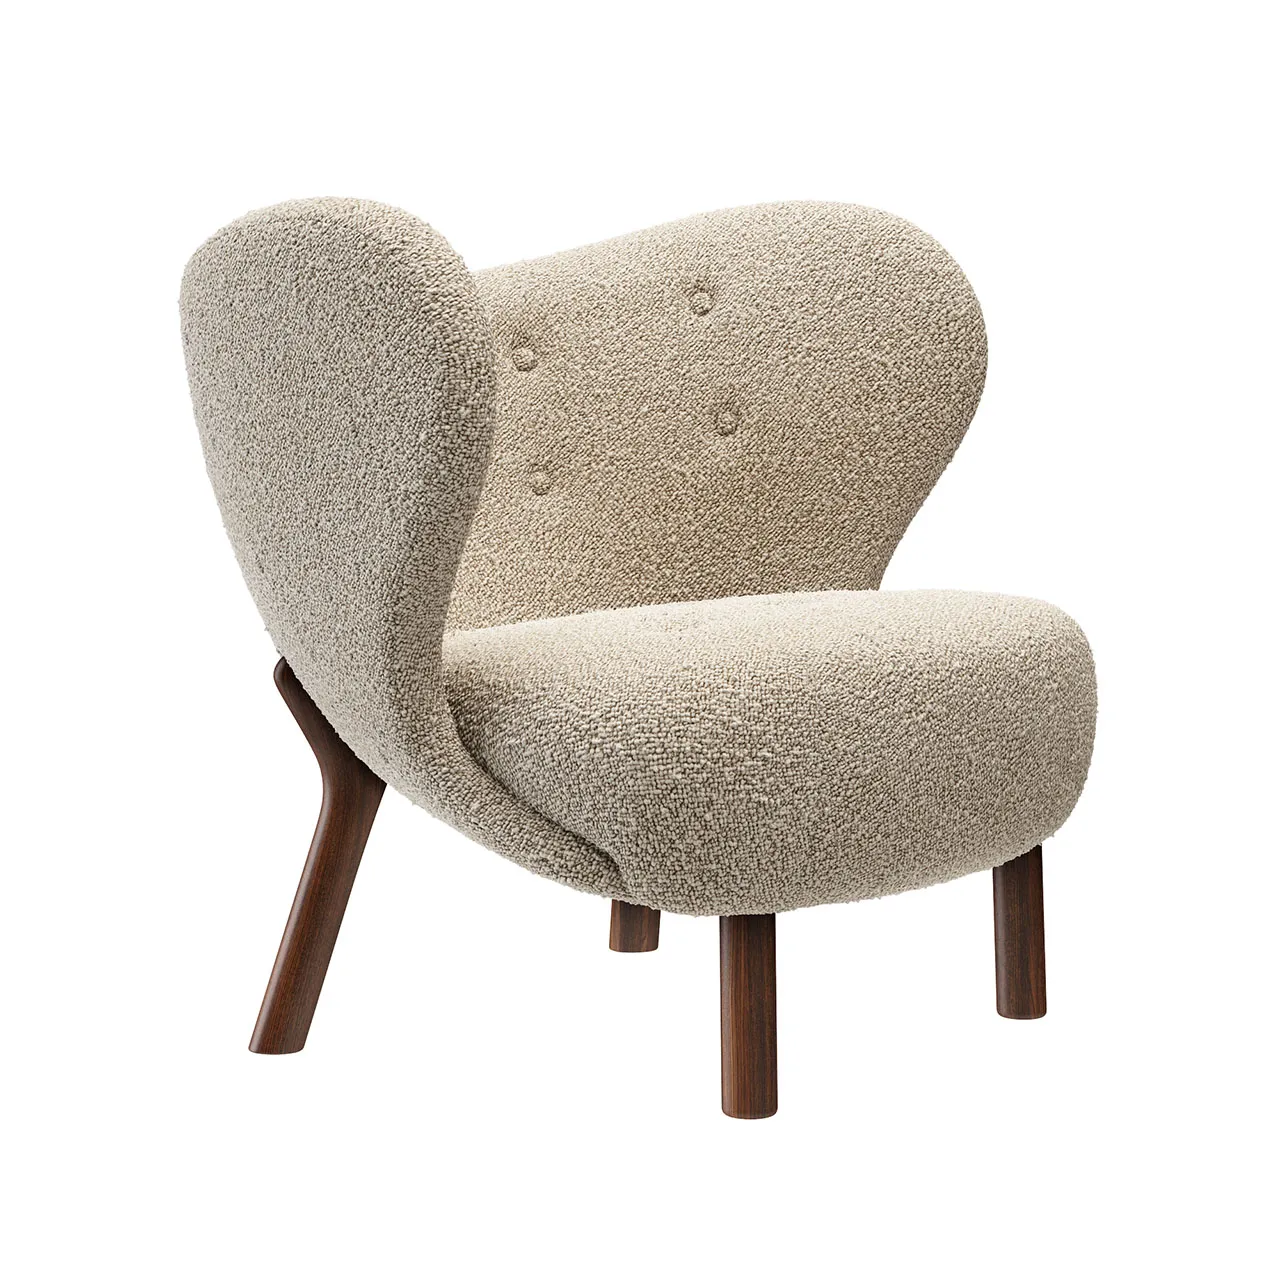 Furniture – little-petra-armchair-by-tradition